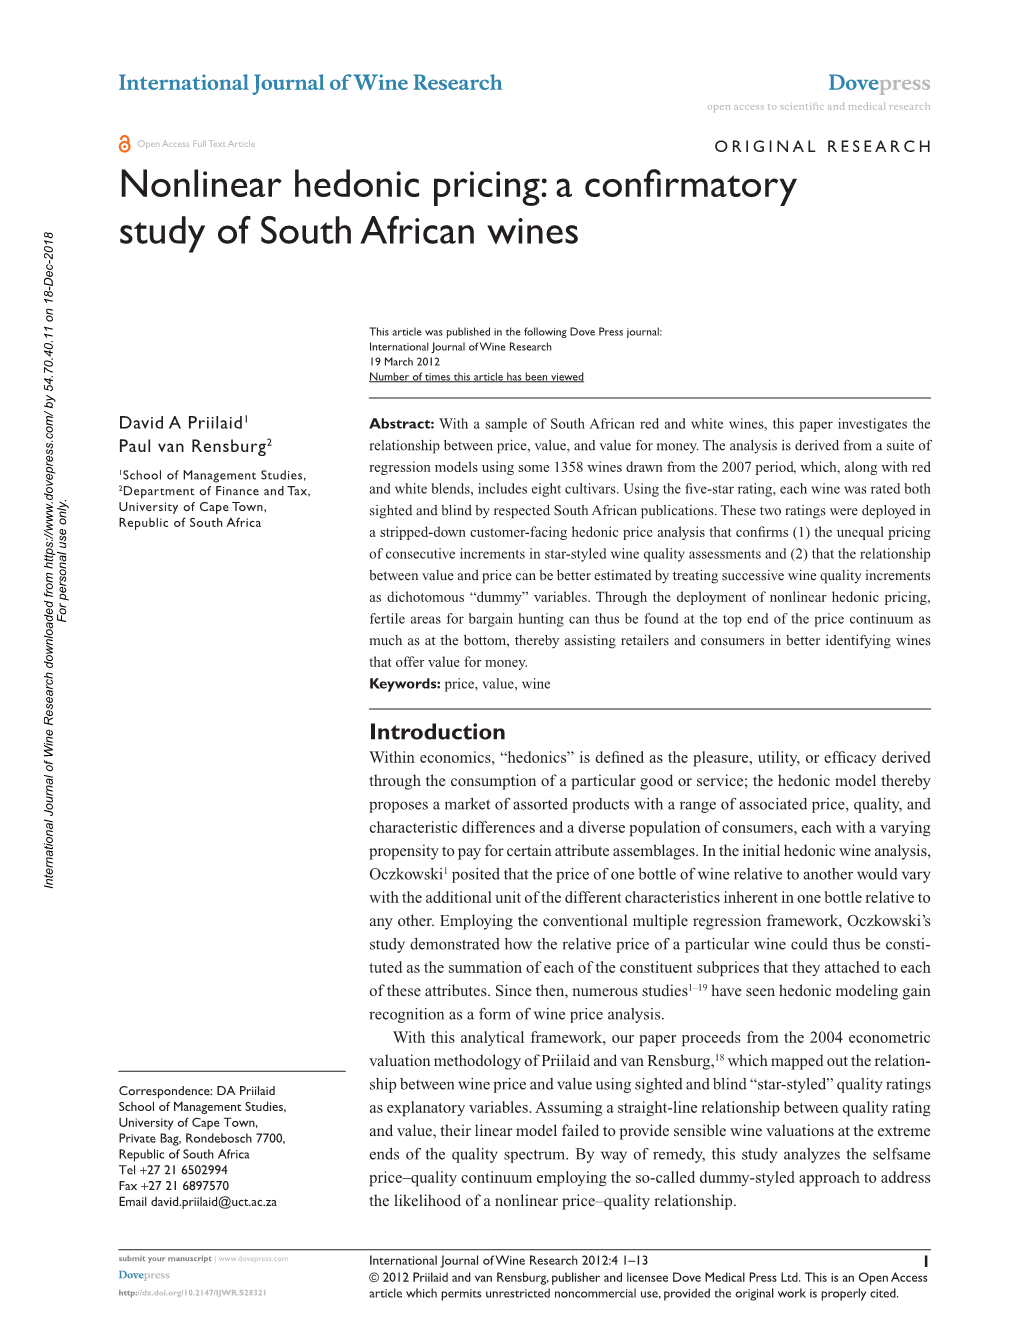 Nonlinear Hedonic Pricing: a Confirmatory Study of South African Wines